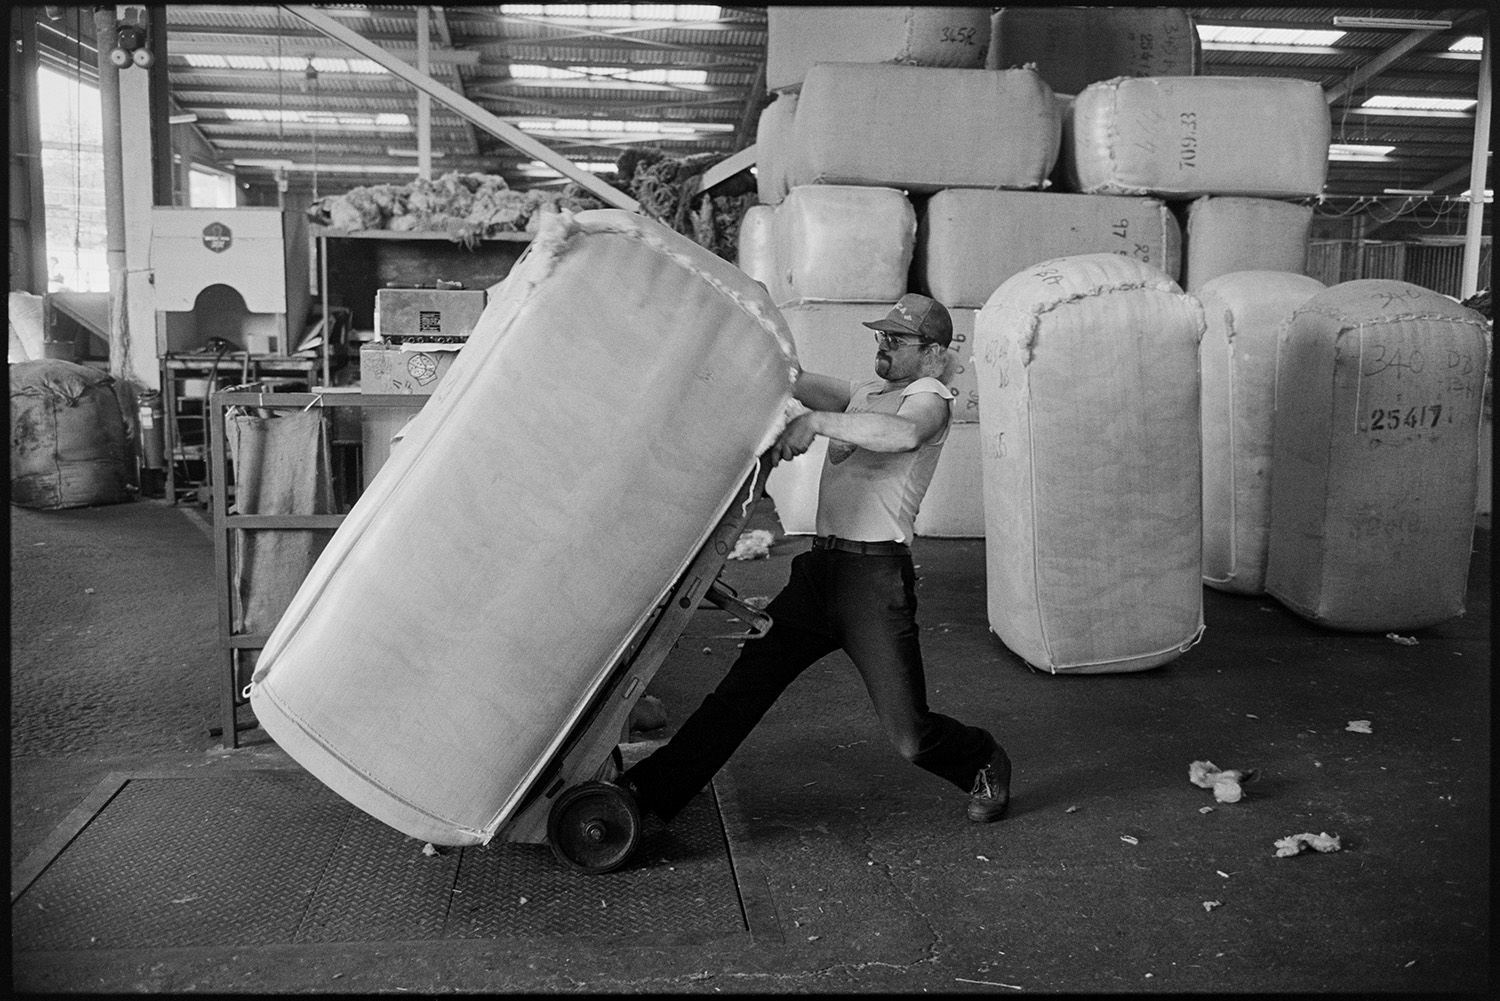 Sorting and packing wool, stacks of bales, office with paper work.
[A man wheeling a large bale of wool on a trolley or sack truck in the warehouse of Devon & Cornwall Wools Ltd at the Pathfields Business Park, in South Molton, with stacks of bales behind him.]